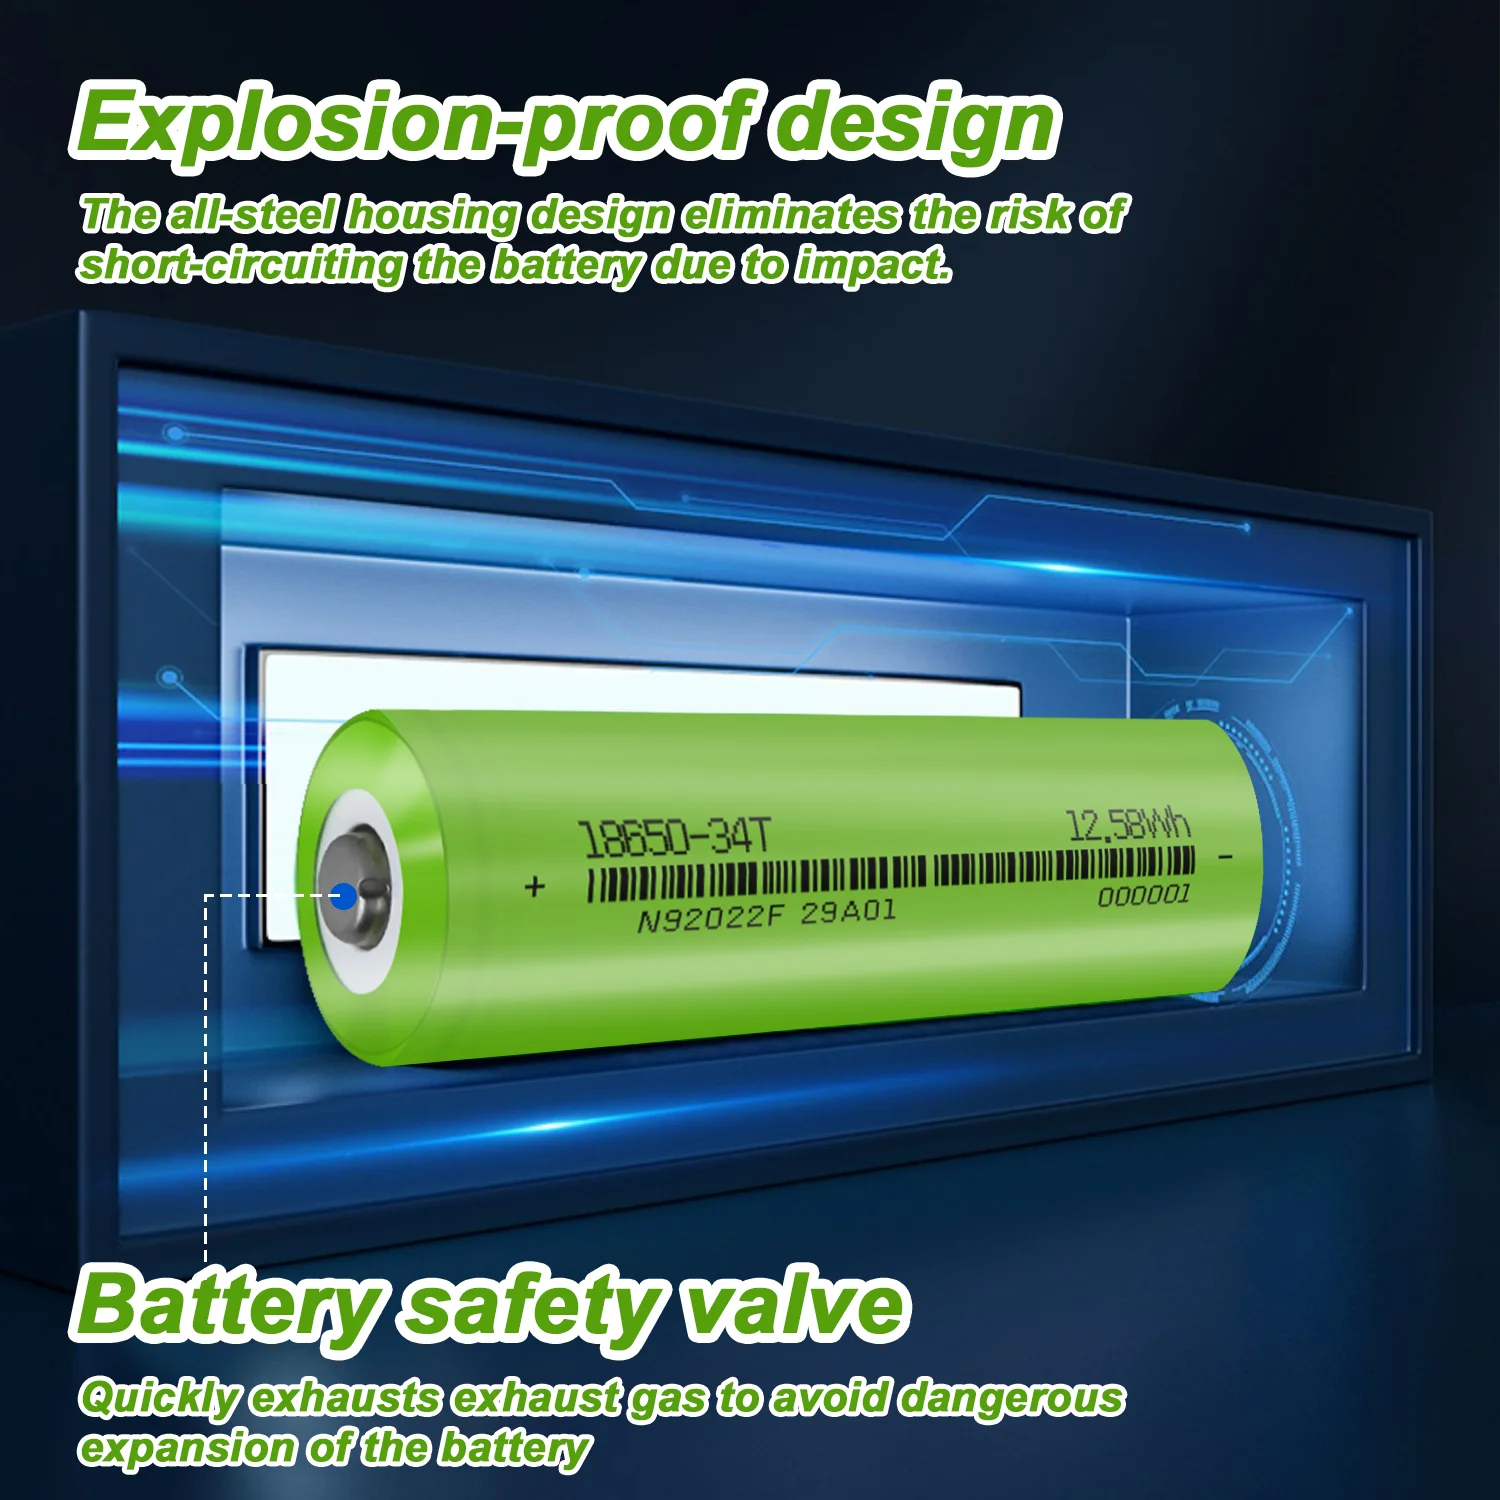 18650 high capacity 3.7v 3400mAh fit battery pack New Original battery 18650 Lithium Rechargeable Battery For Flashlight battery